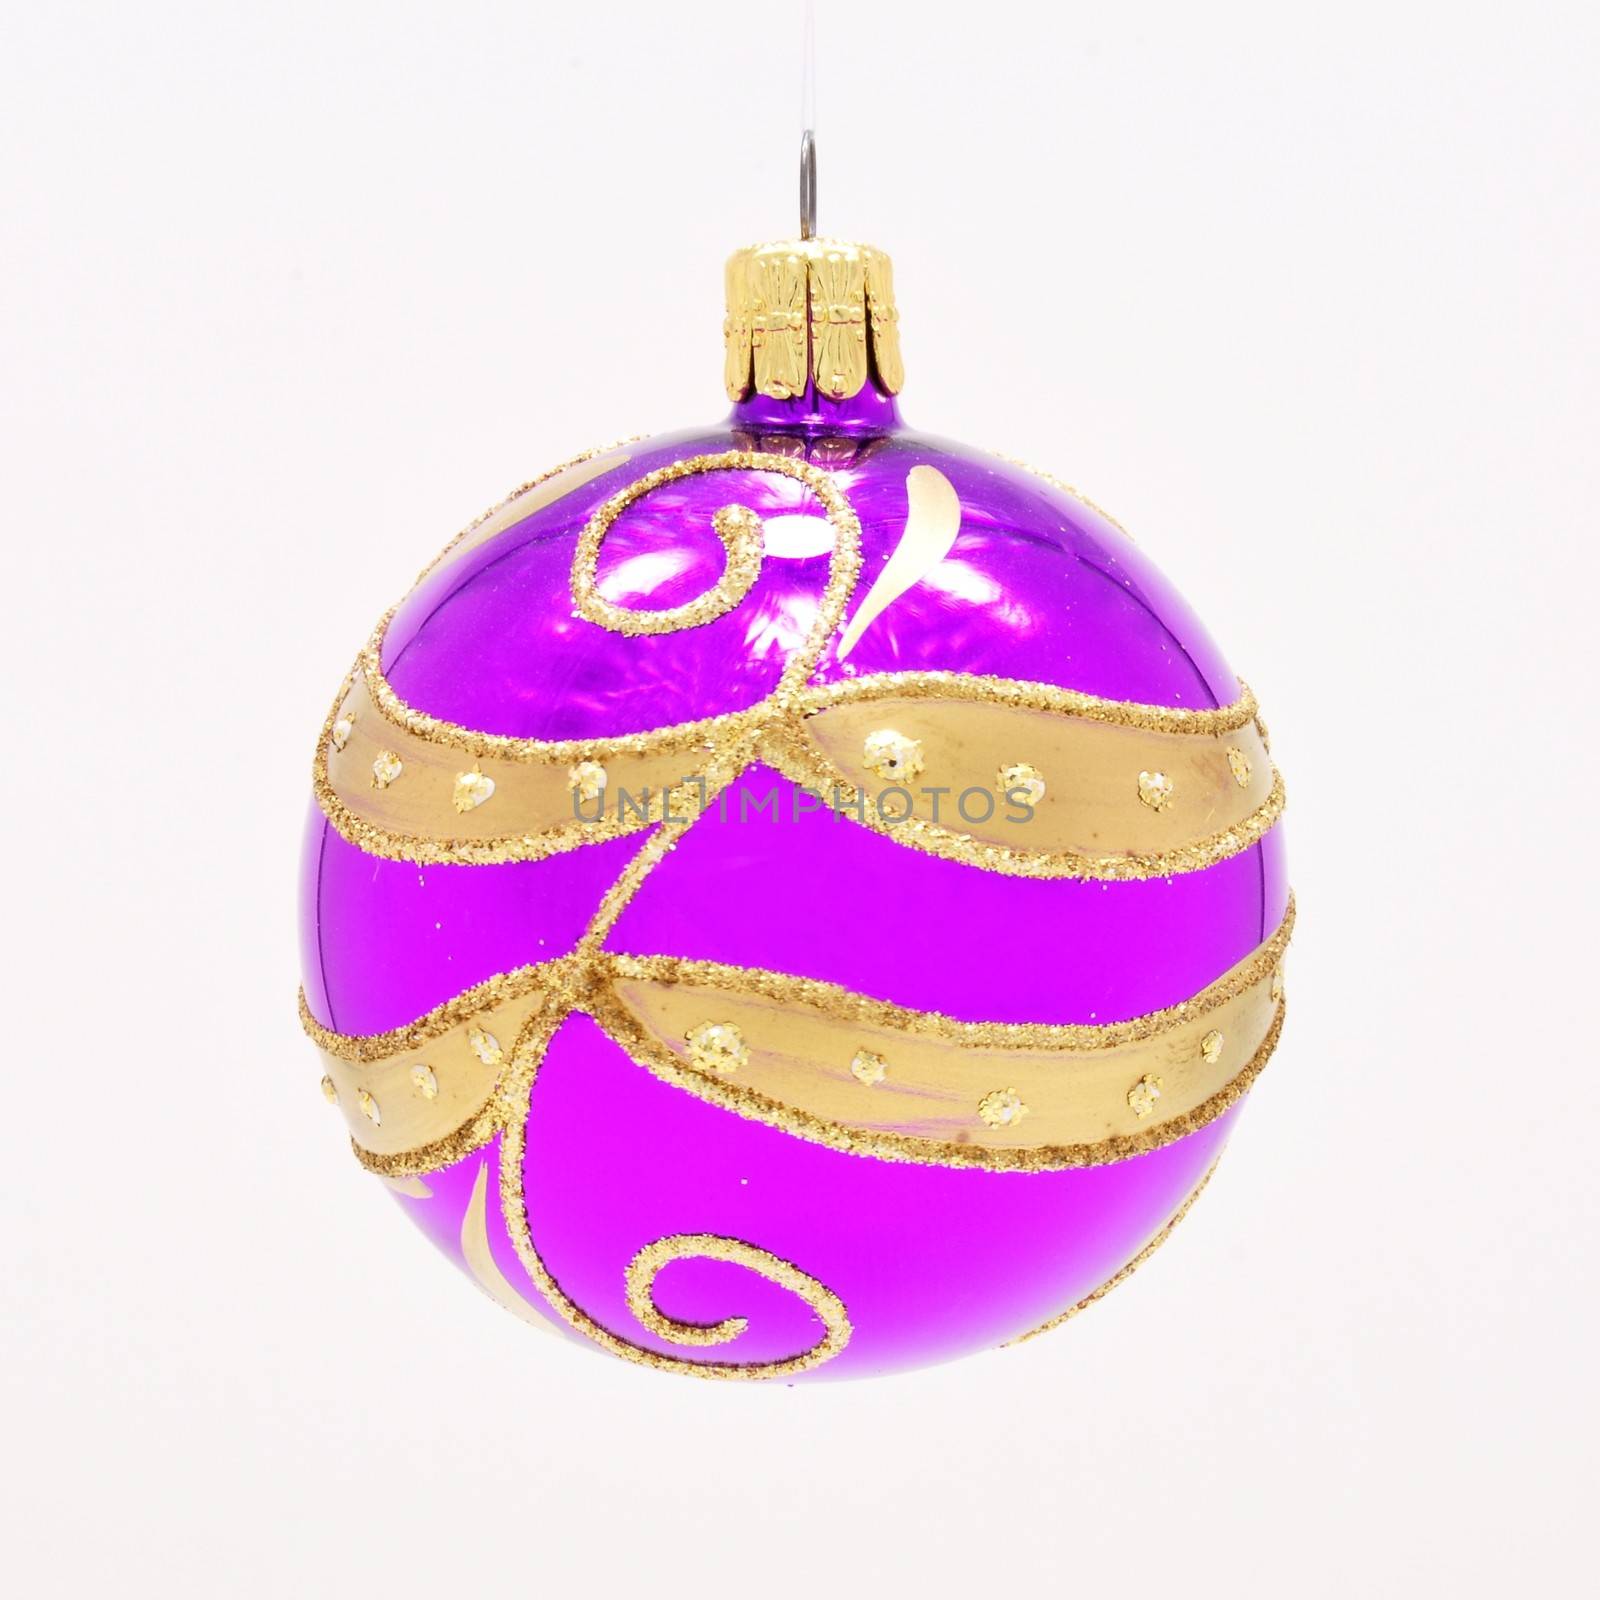 Beautiful colorful Christmas ornament with gold accents